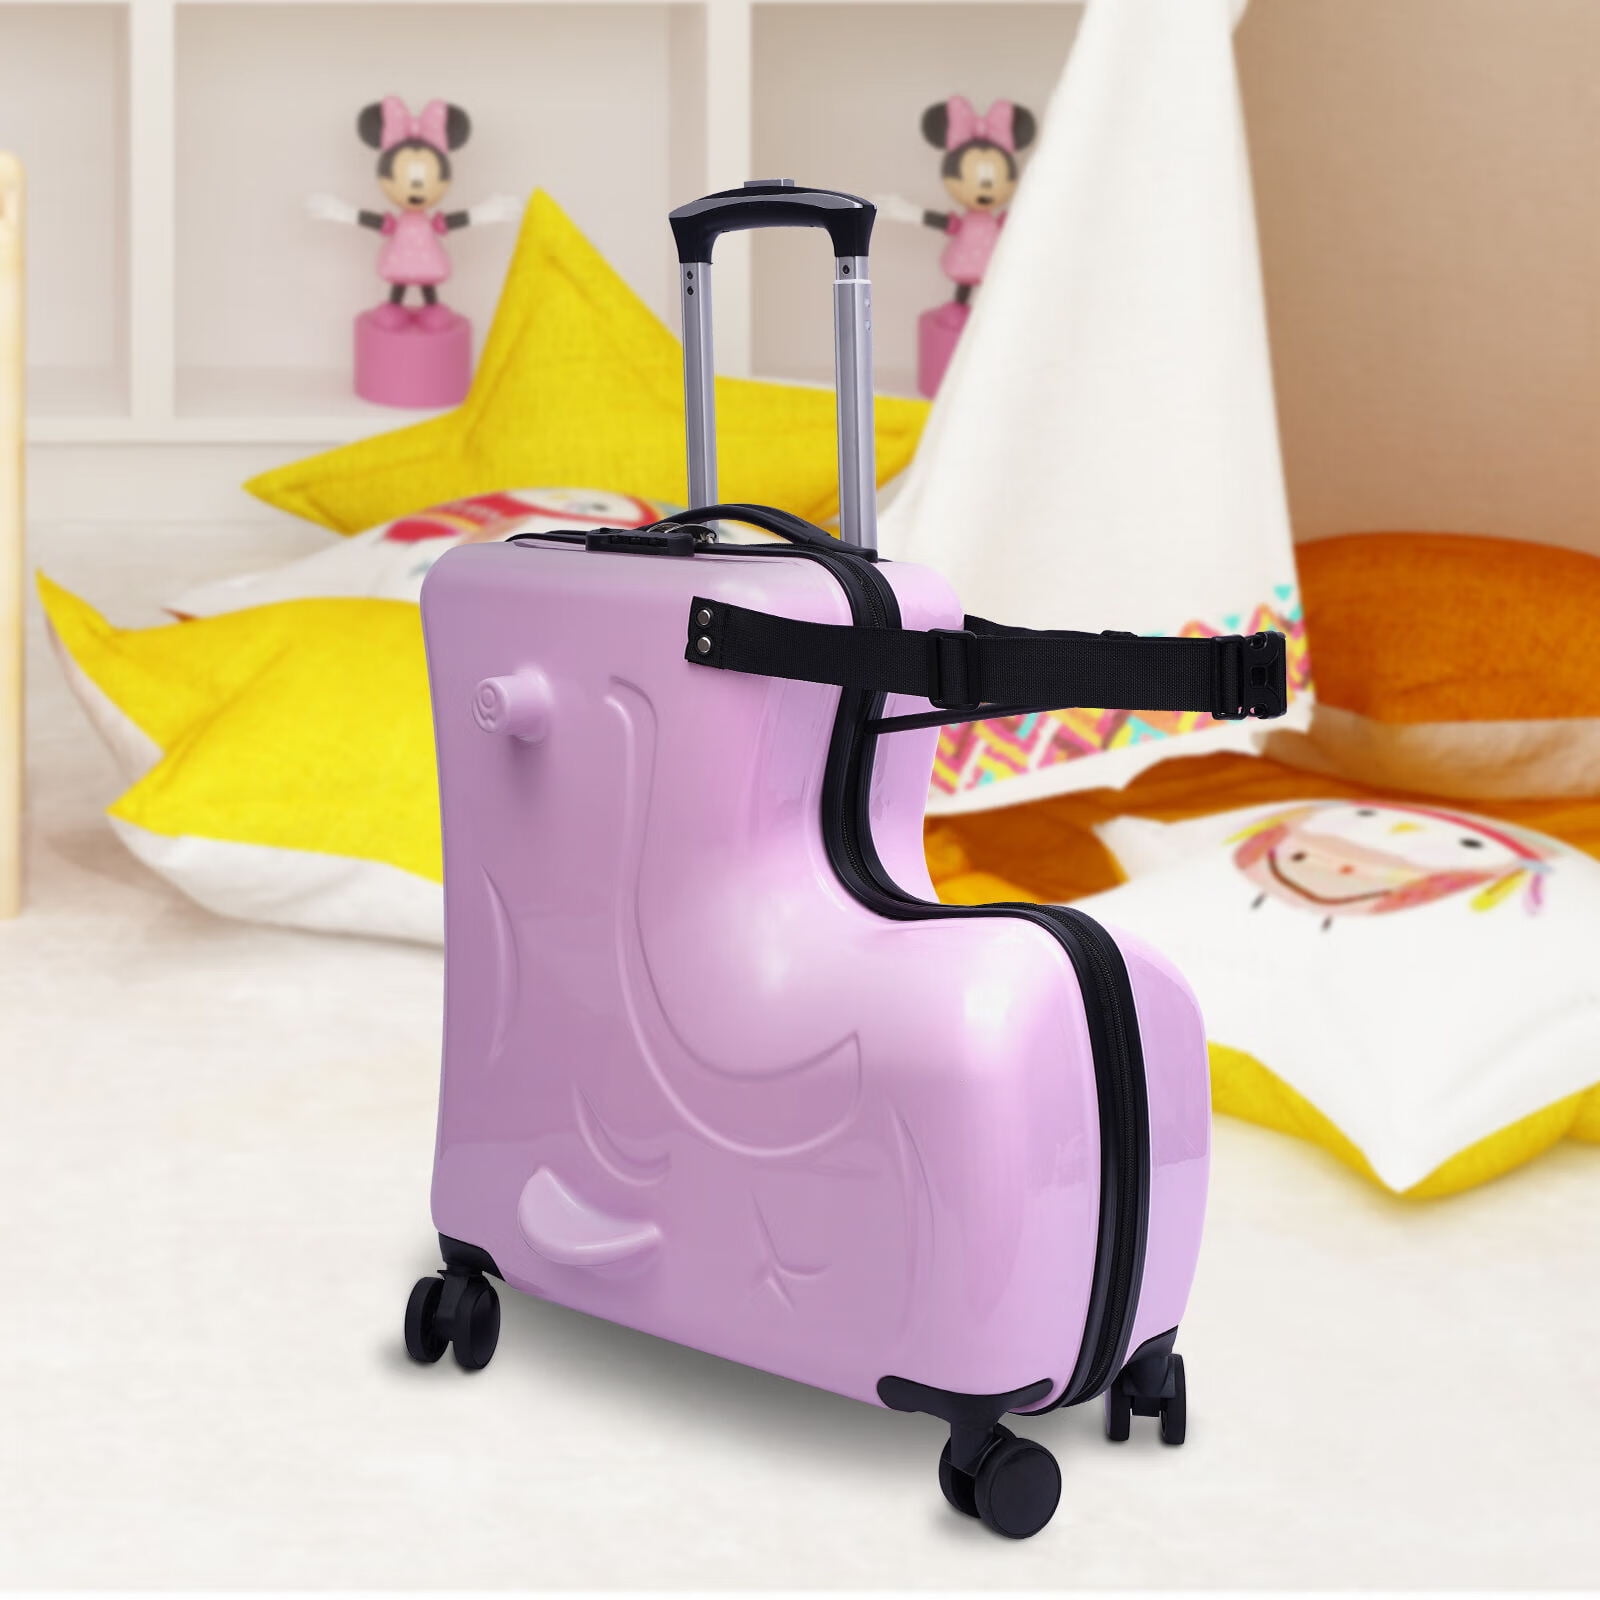 N-A AO WEI LA OW Kids ride-on Suitcase carry-on Tollder Luggage with Wheels  Suitcase to Kids aged 6-12 years old (Blue, 24 Inch).